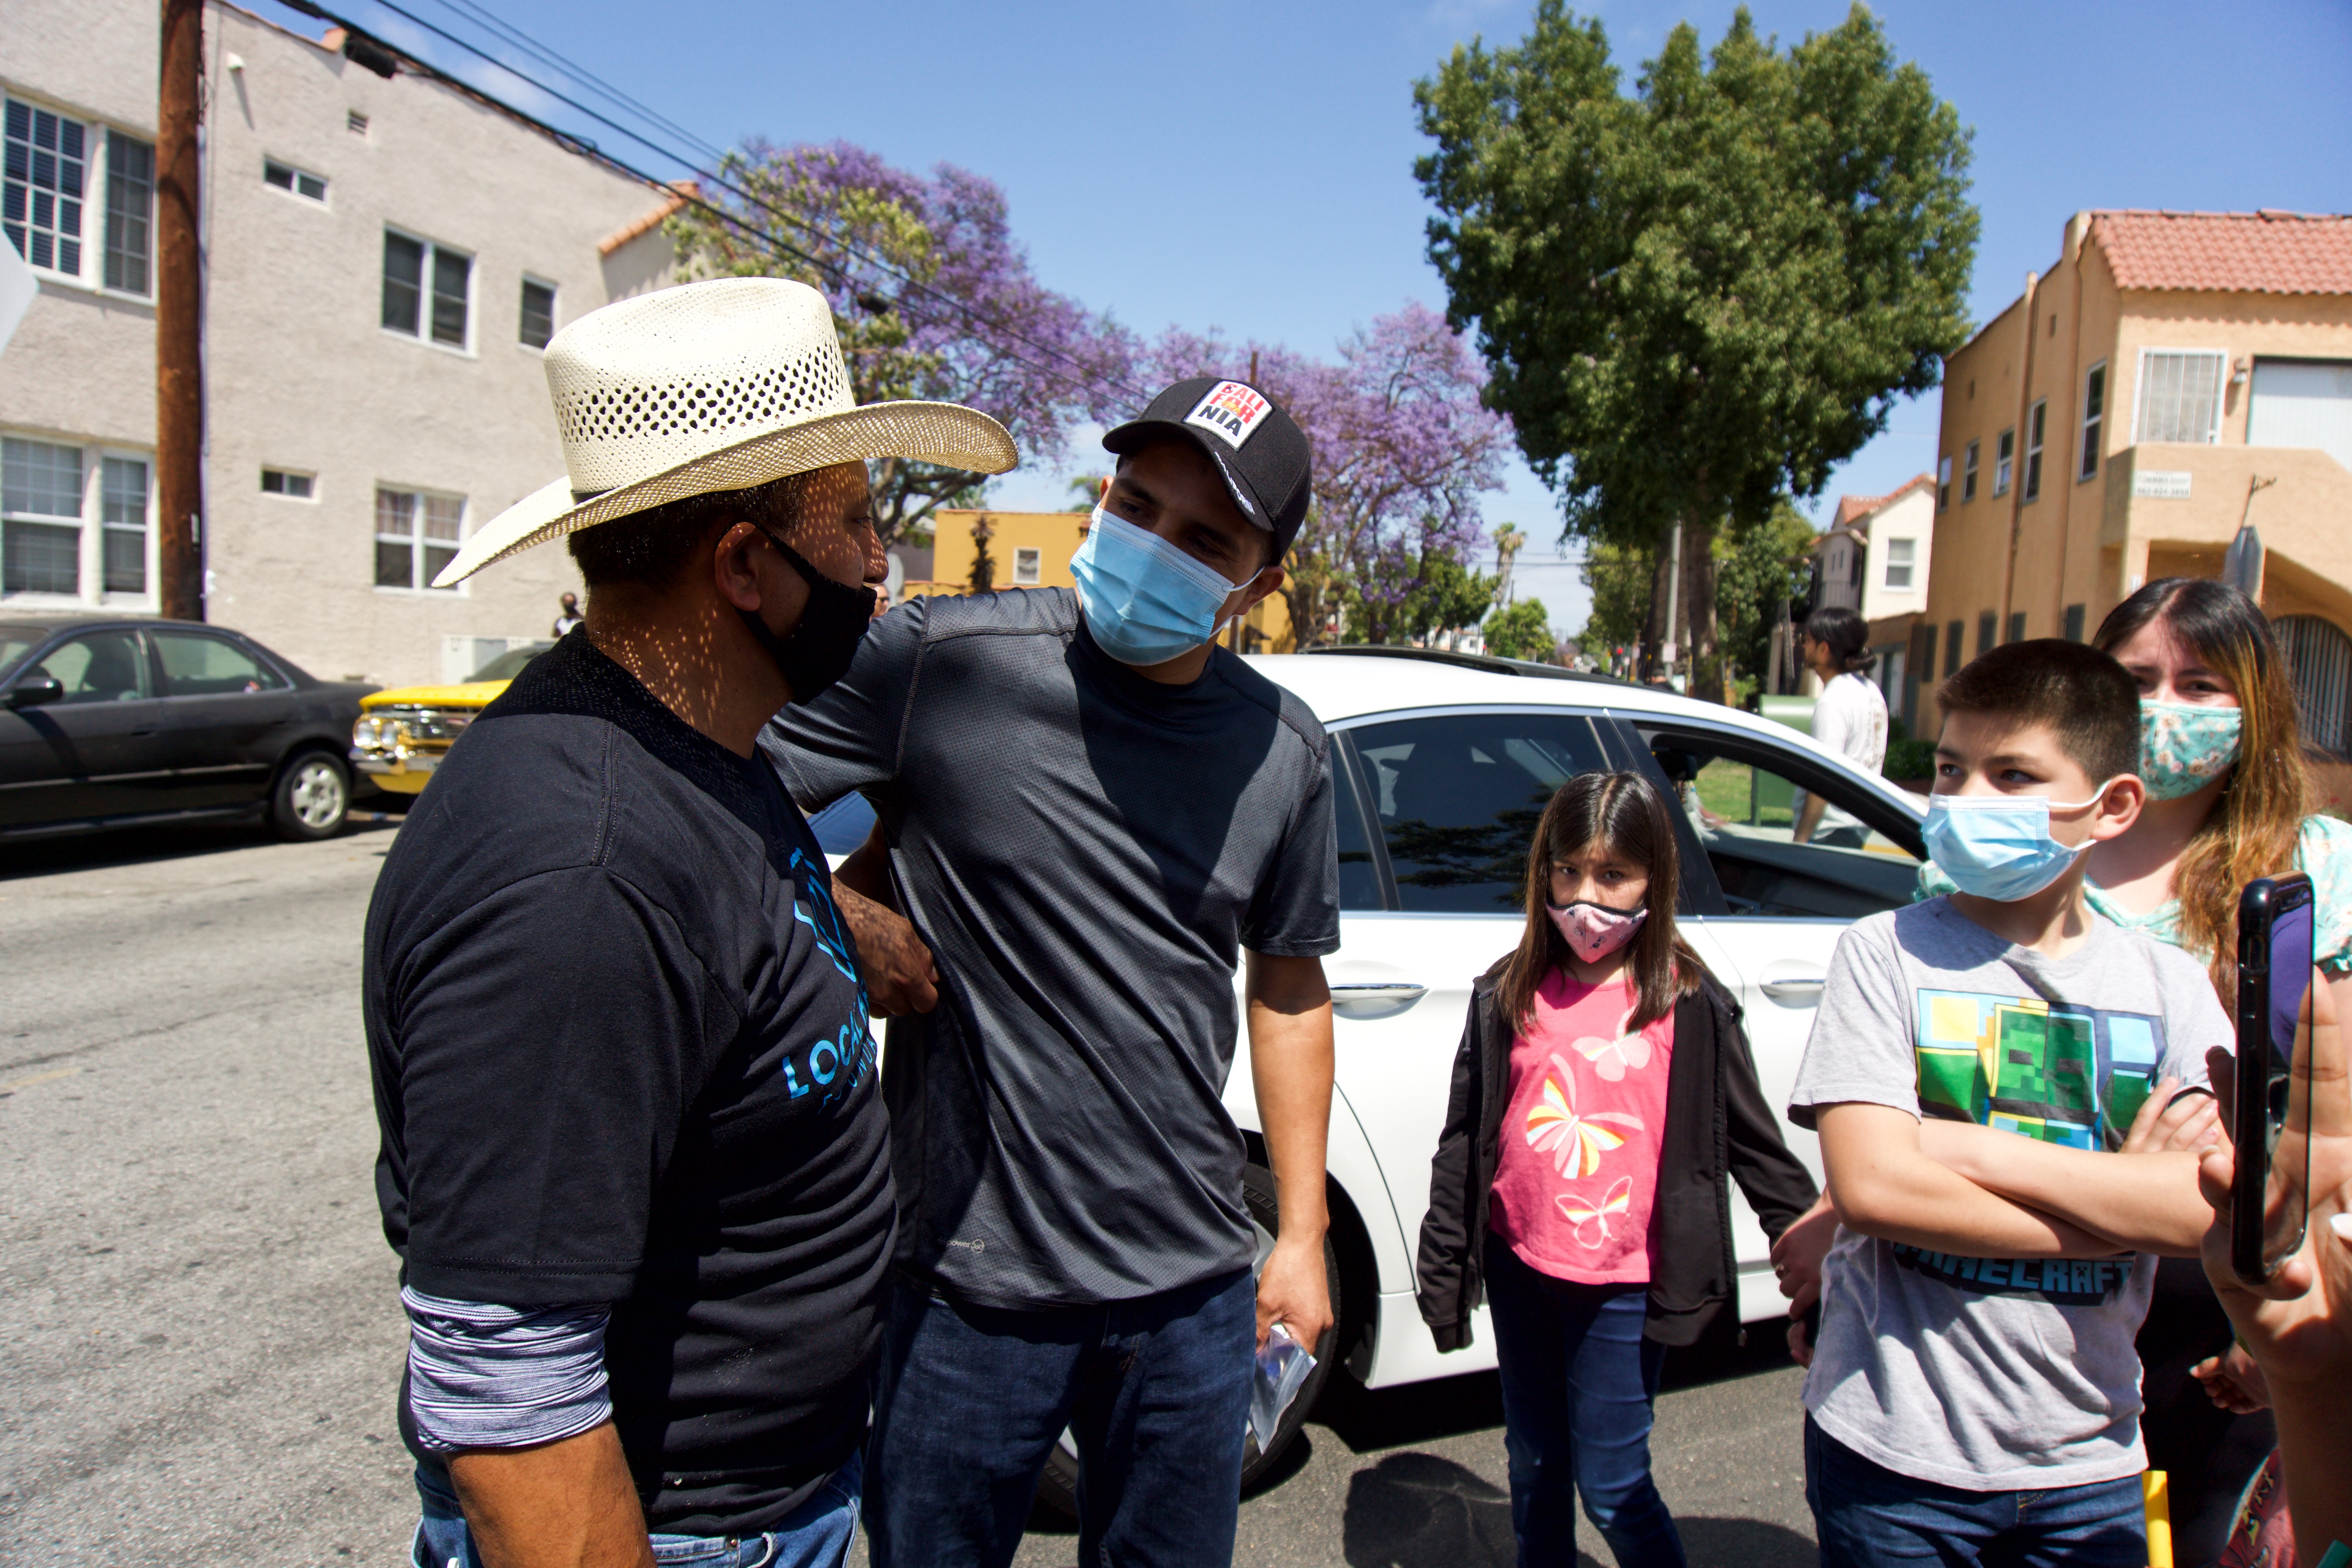 Jose Luis Millán the vendor who was shot in Watts on April 30th meets with the two vendors who were harassed in Long Beach.